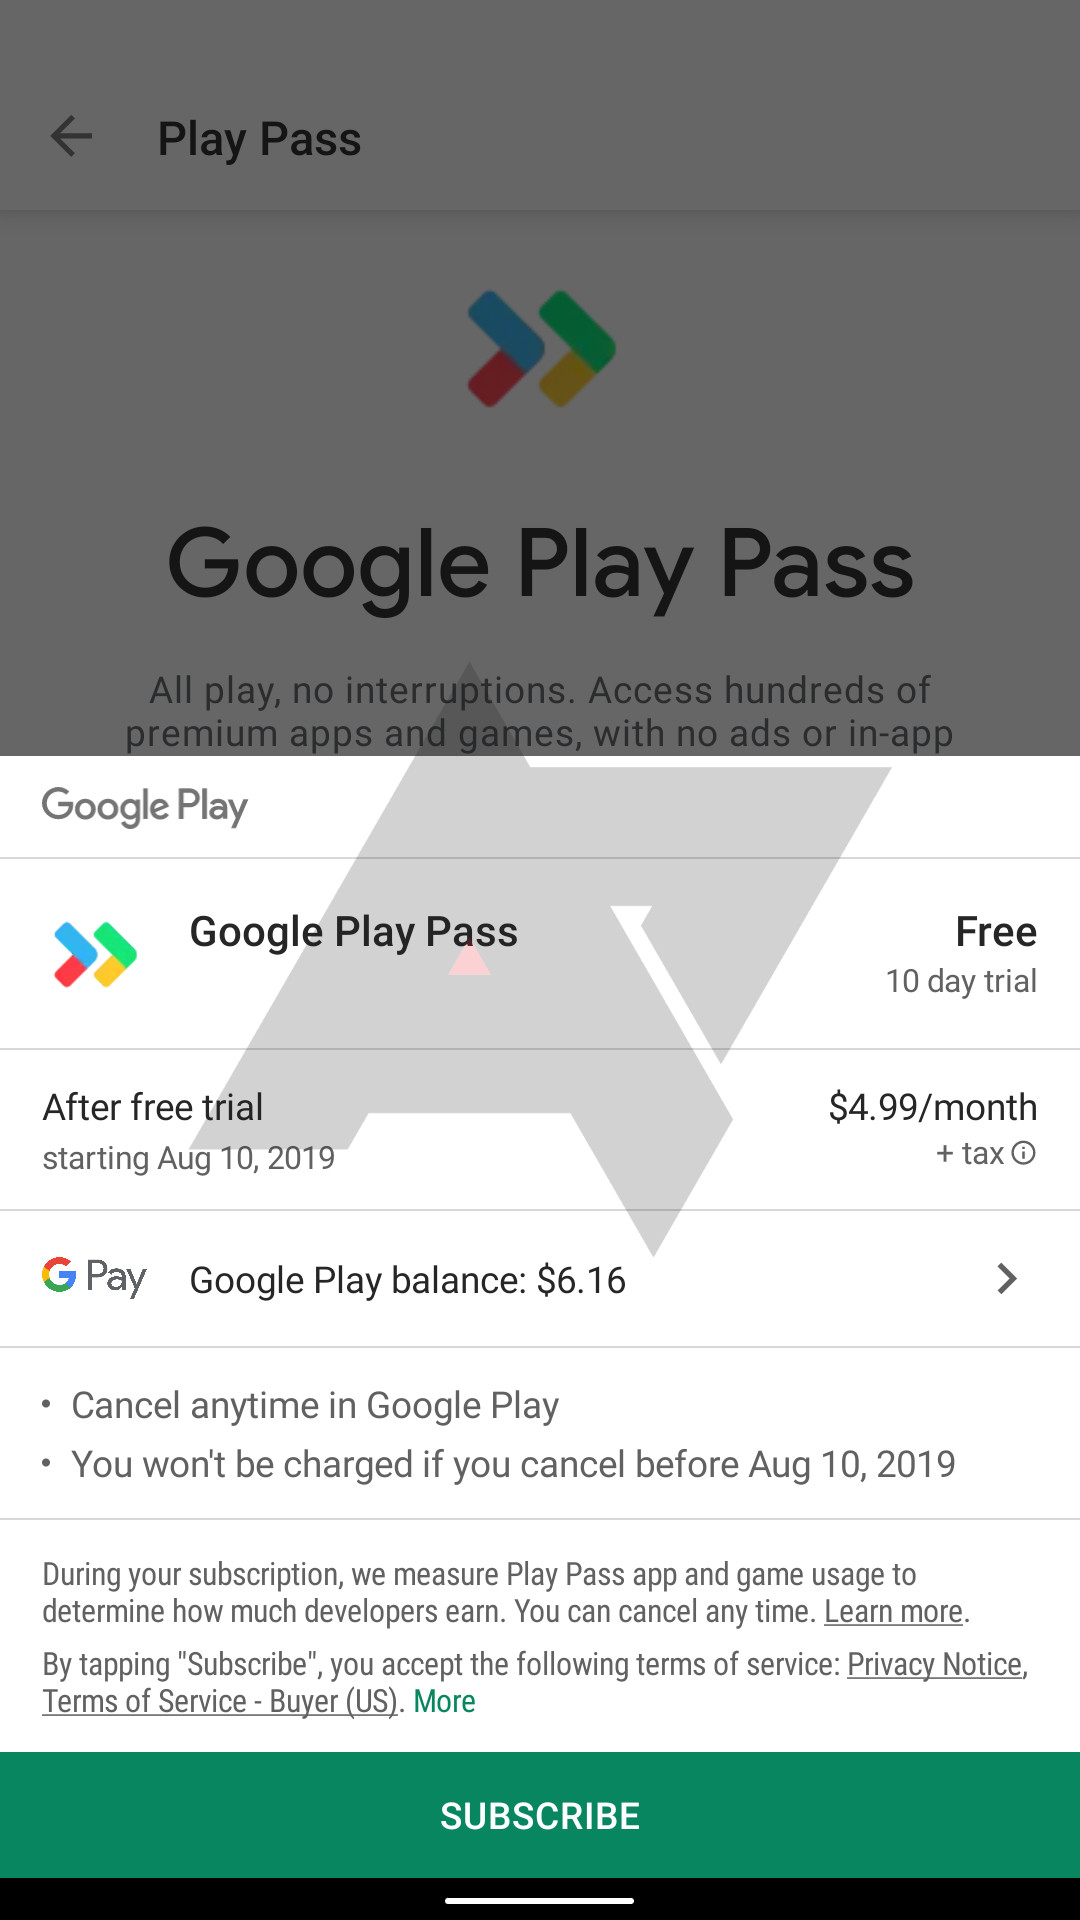 Google Play Pass sign-up page.